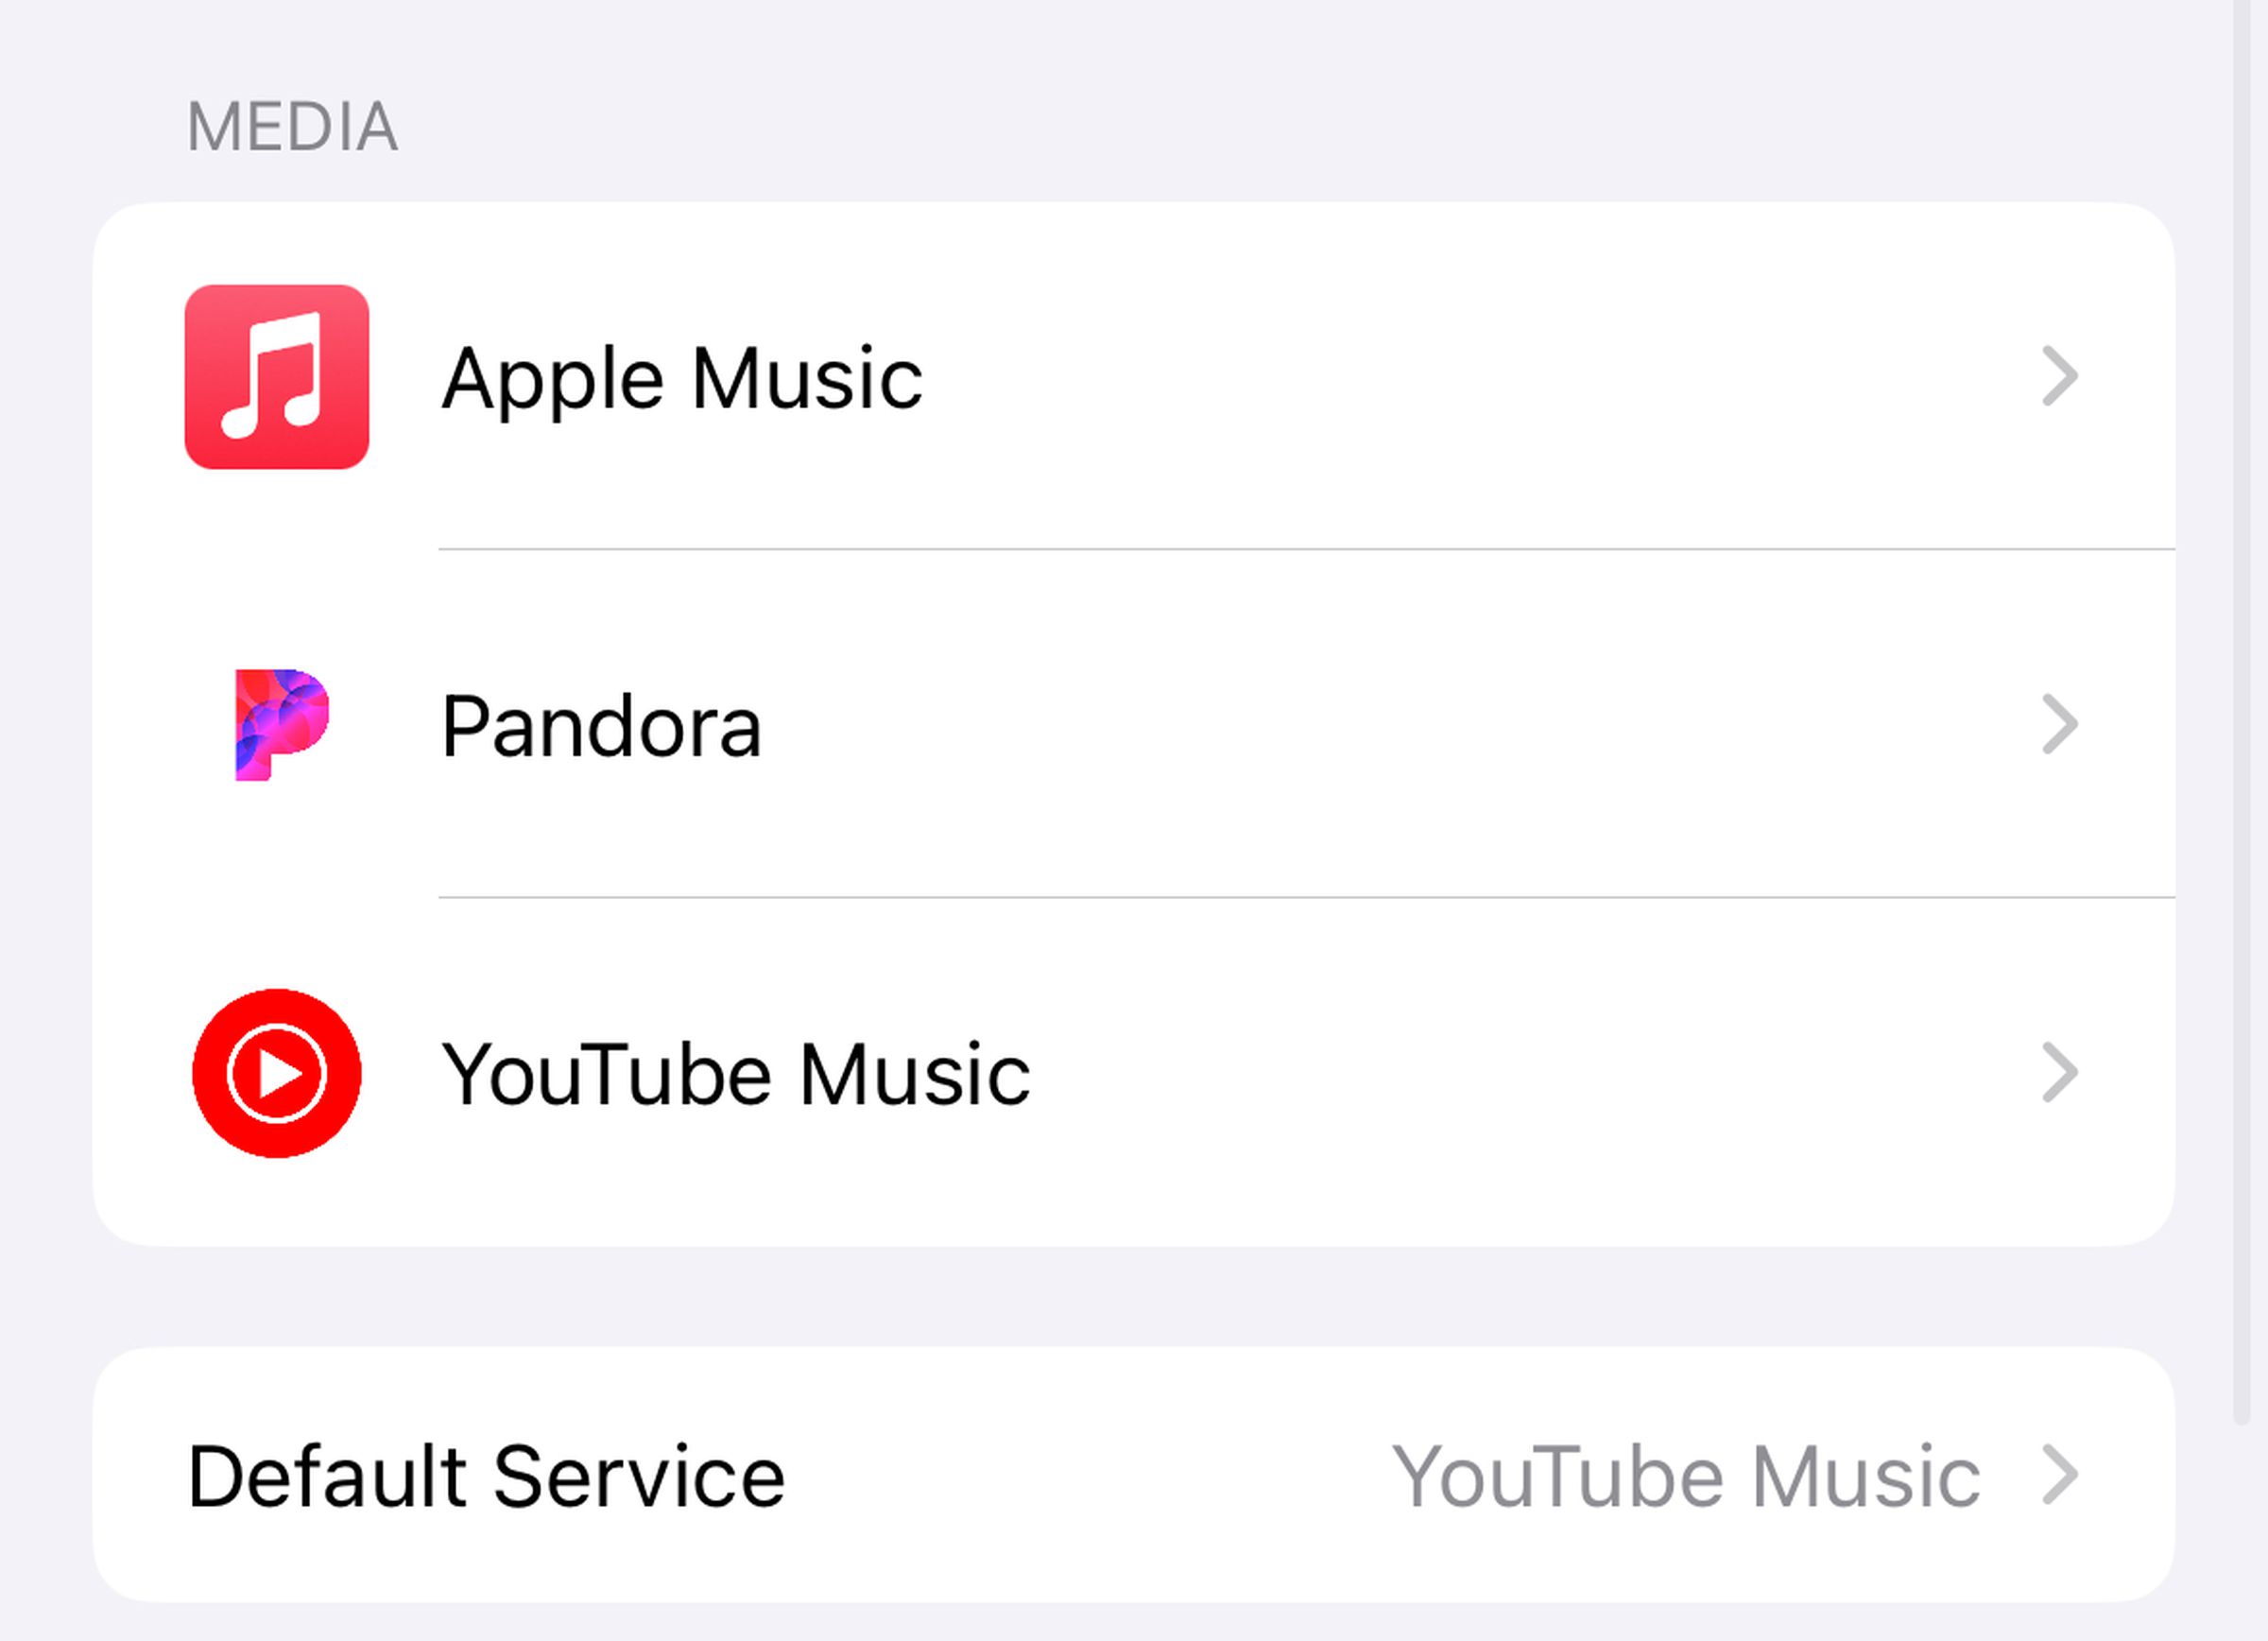 A screenshot showing the available HomePod media services in the Apple Home app. It lists Apple Music, Pandora, and YouTube Music, and shows YouTube Music as the Default Service.